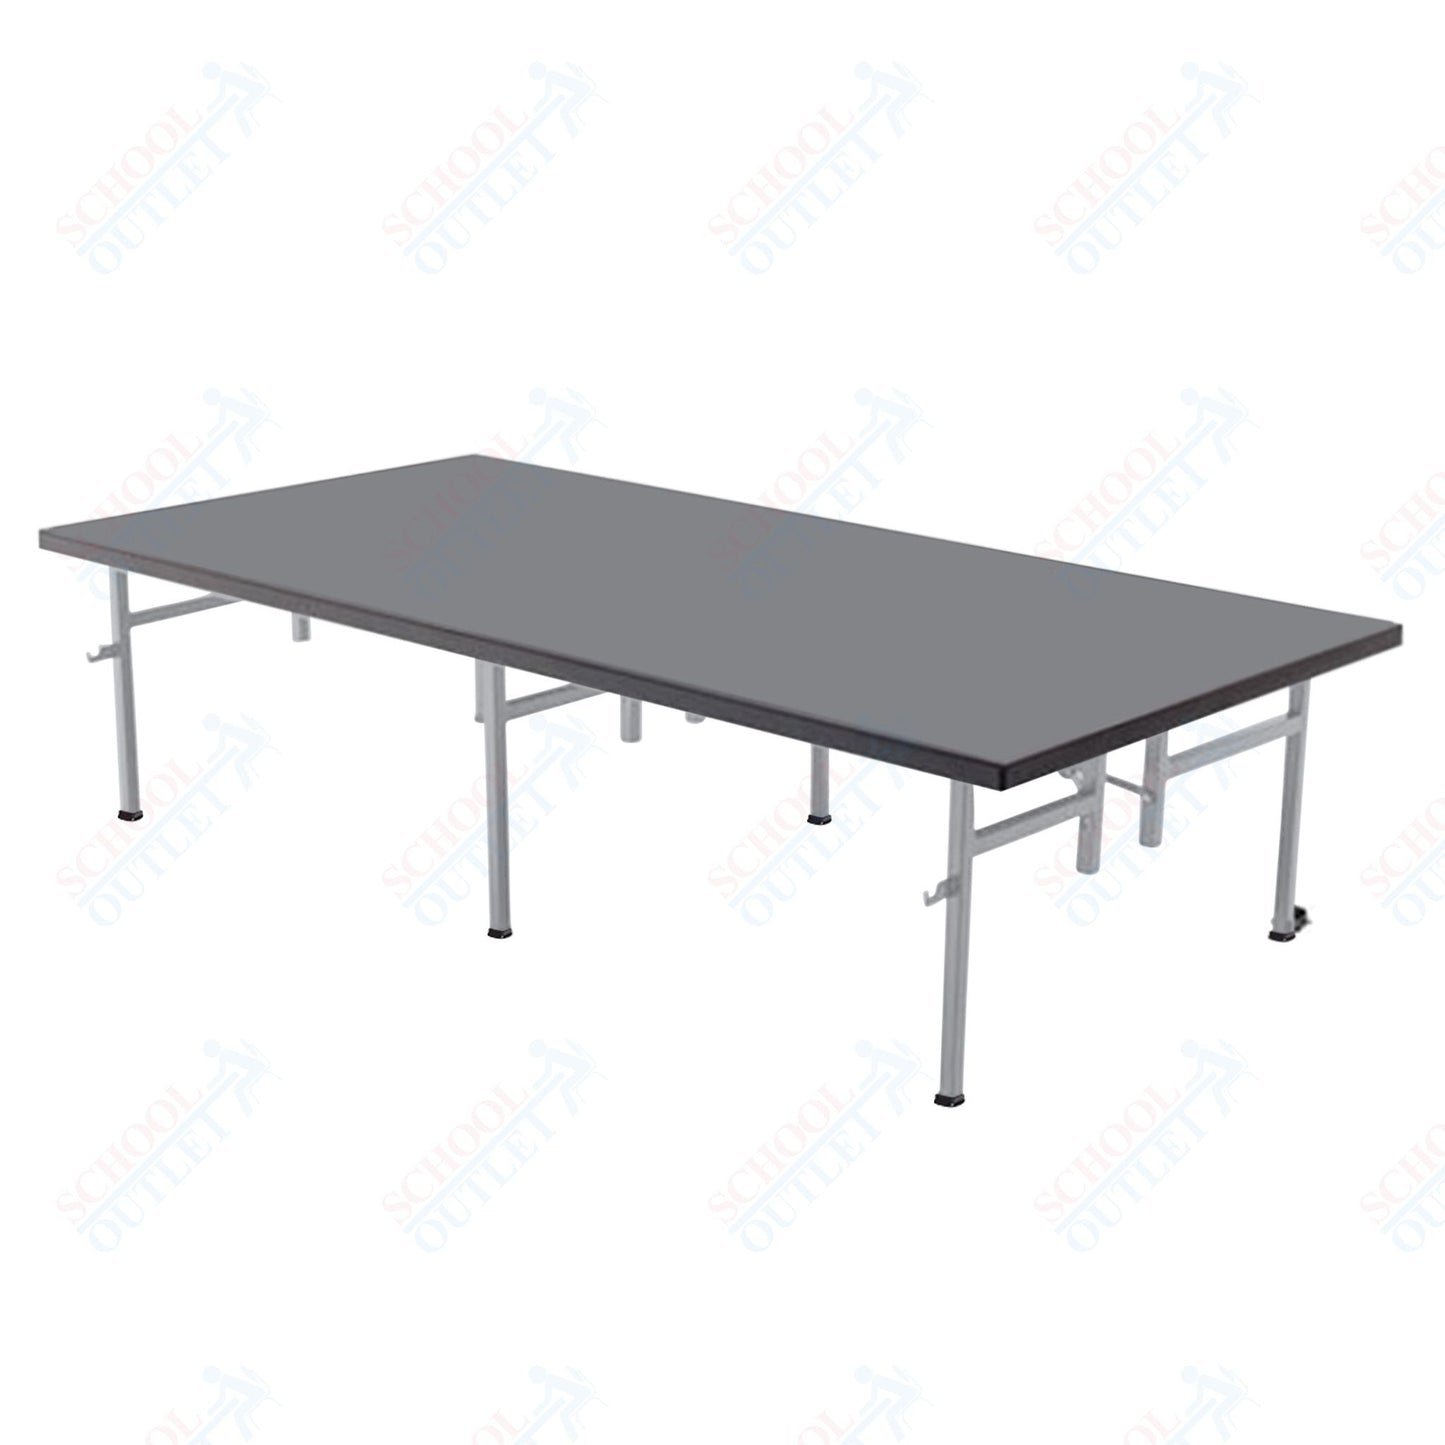 AmTab Fixed Height Stage - Polypropylene Top - 36"W x 96"L x 24"H (AmTab AMT - ST3824P) - SchoolOutlet